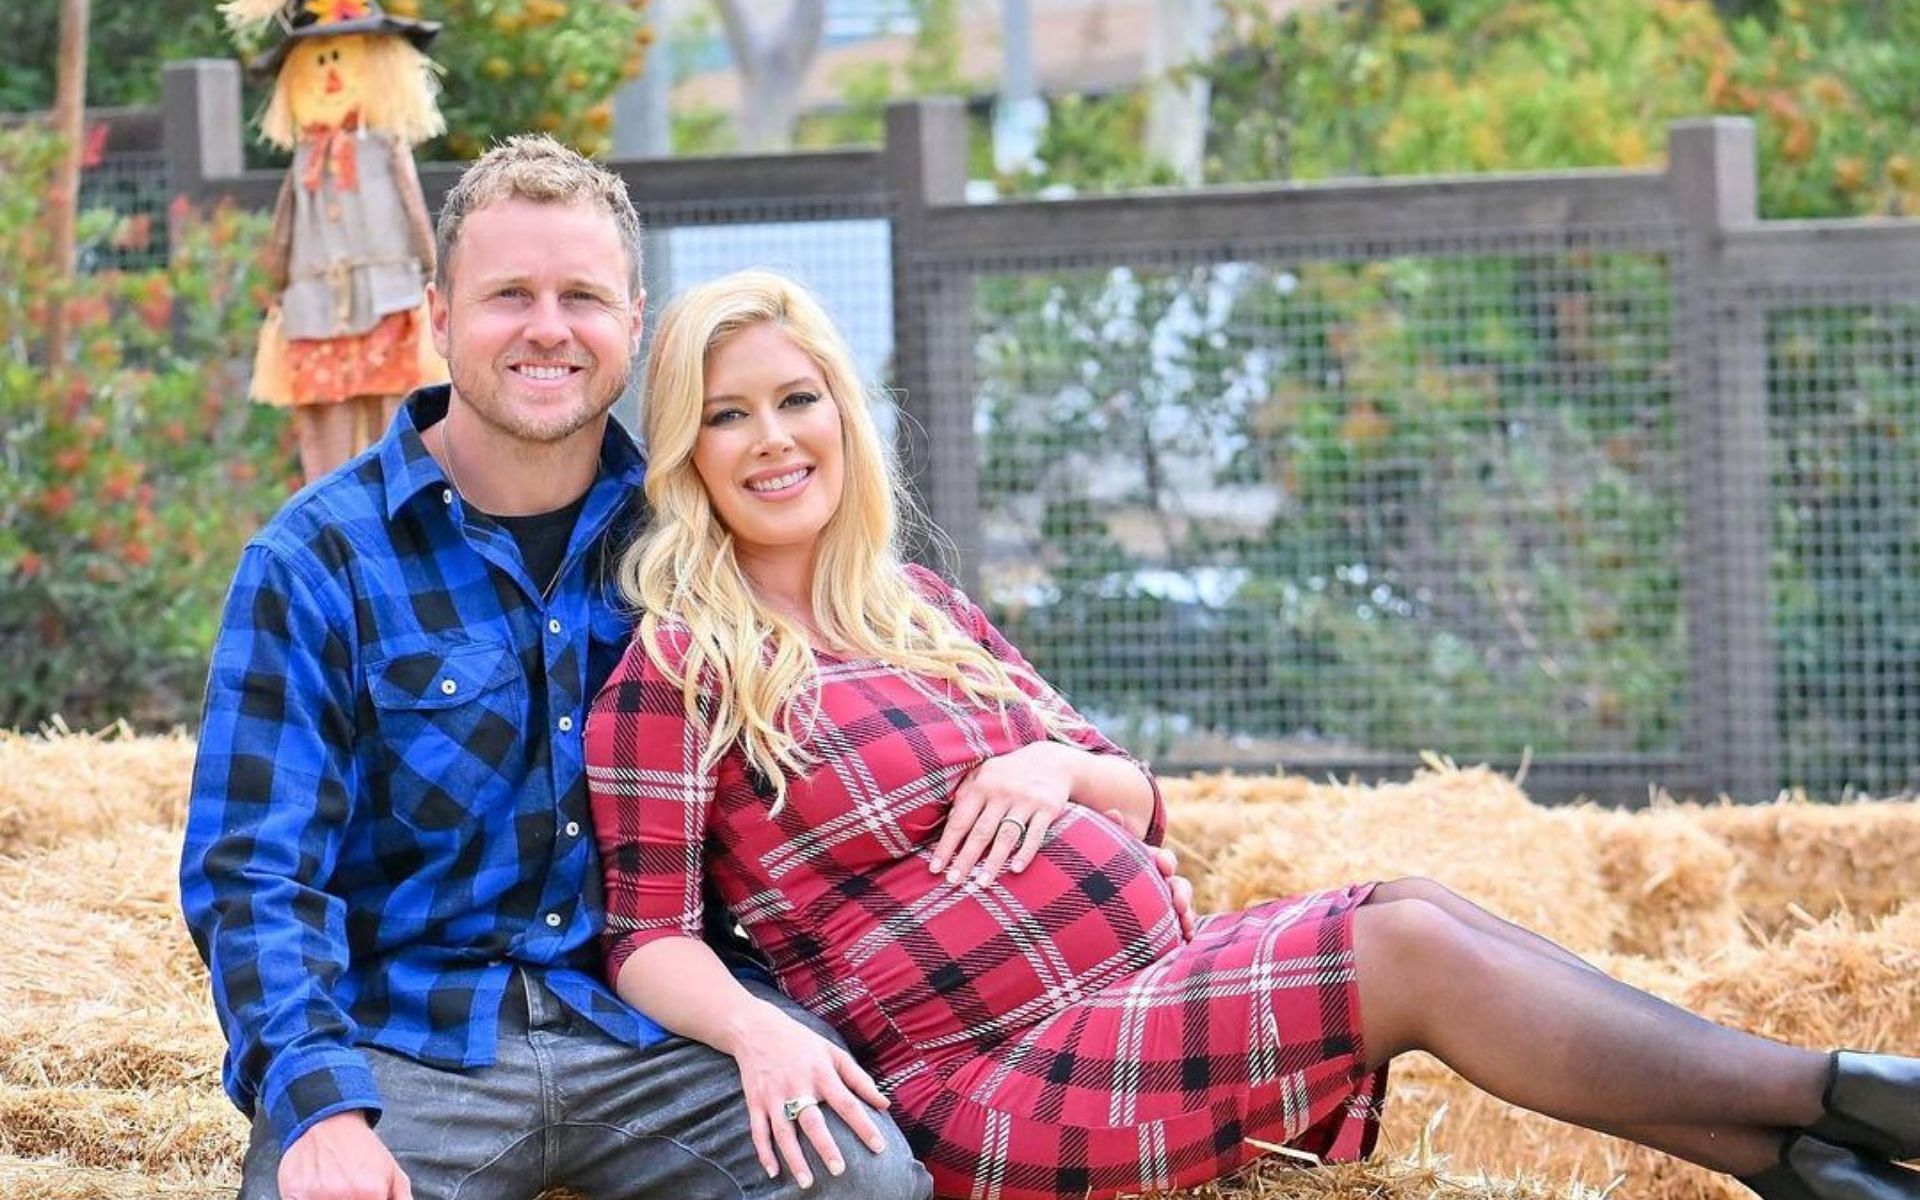 What are Heidi Montag and Spencer Pratt’s net worth? Couple’s fortune